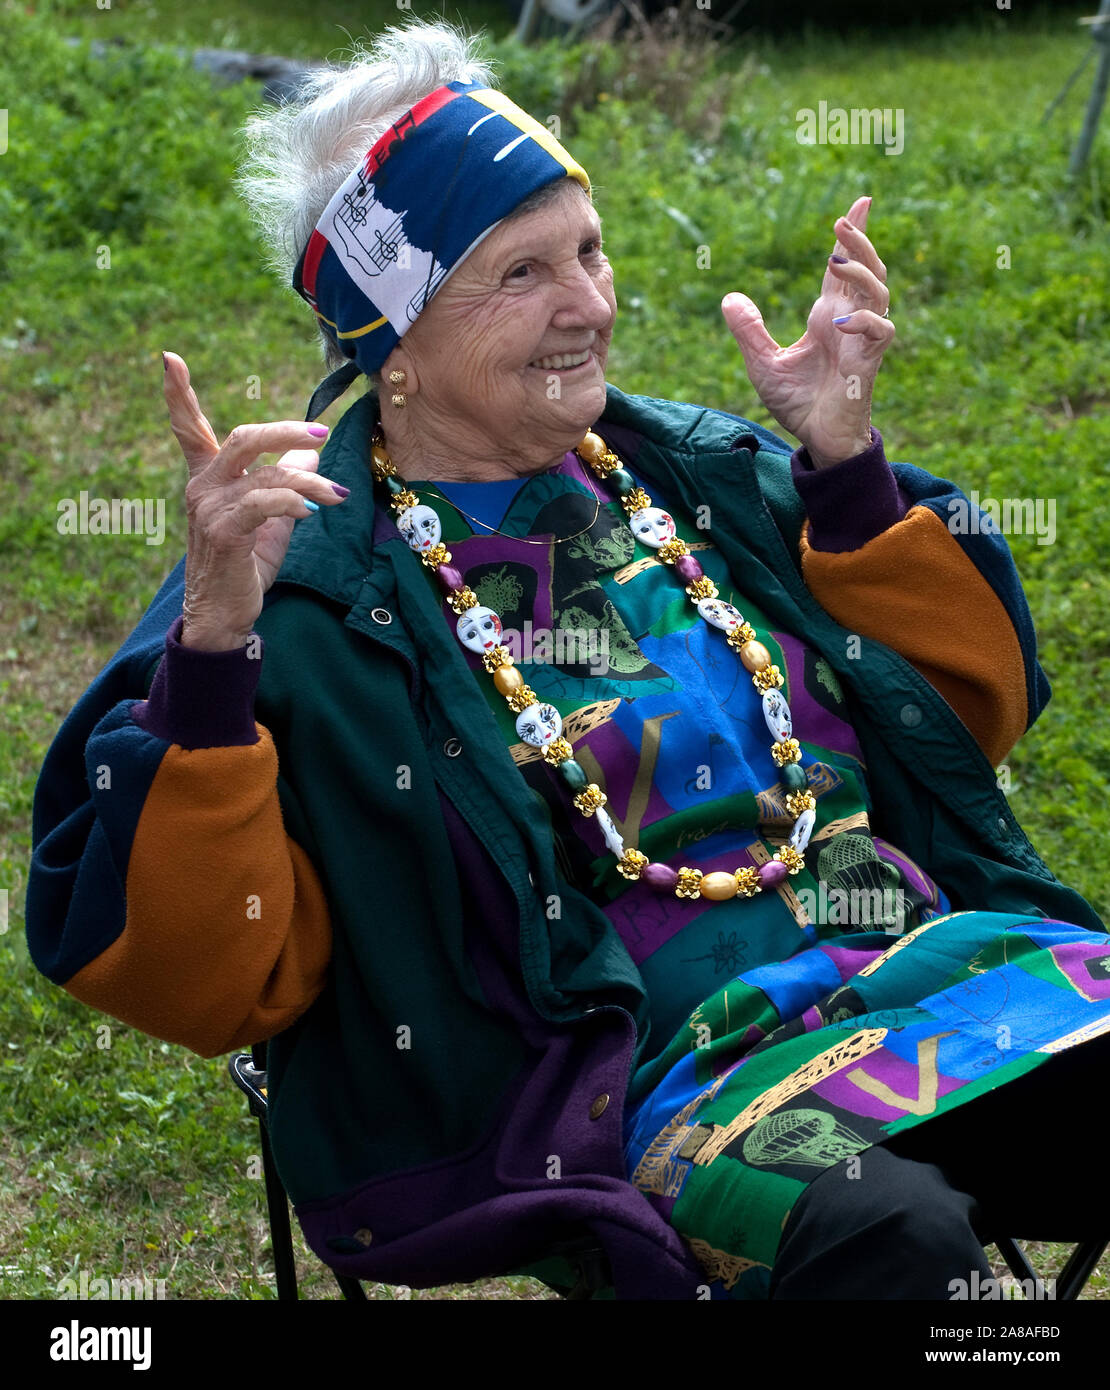 A woman waves to friends during the annual Mardi Gras parade March 6, 2011 in Grand Isle, Louisiana. Stock Photo